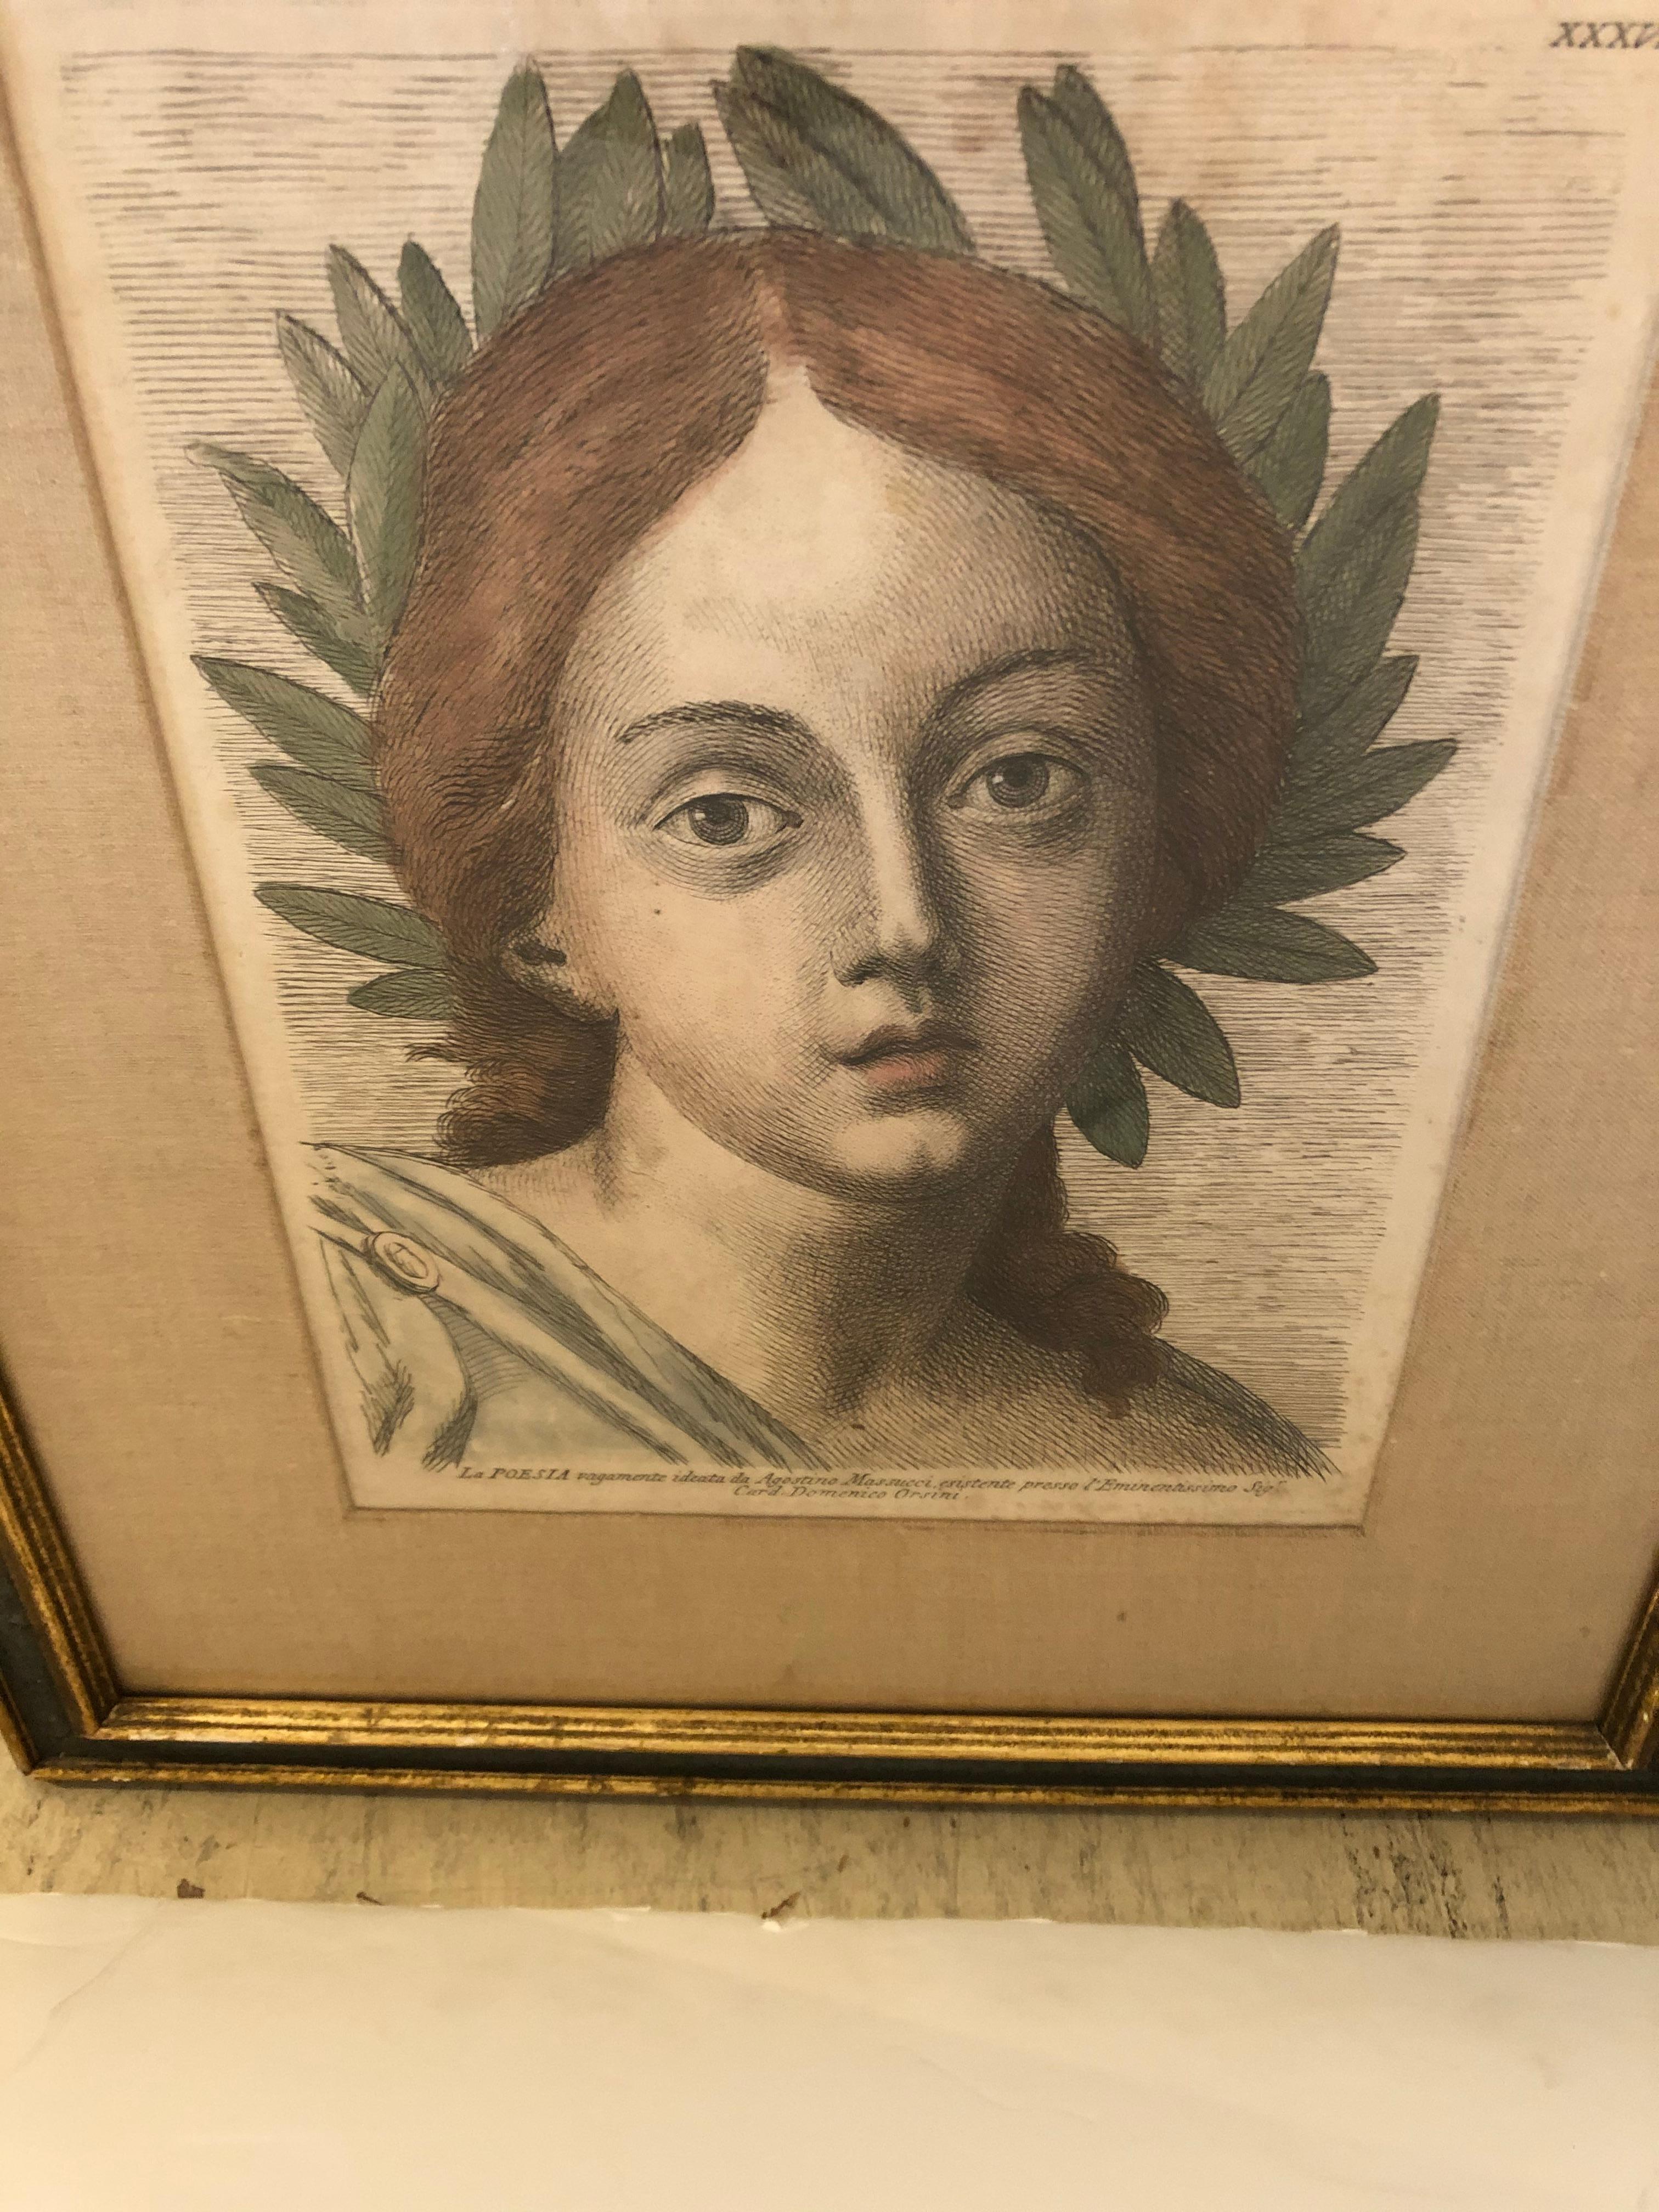 A beautiful early hand colored engraving of an ethereal female face adorned in head wreath.